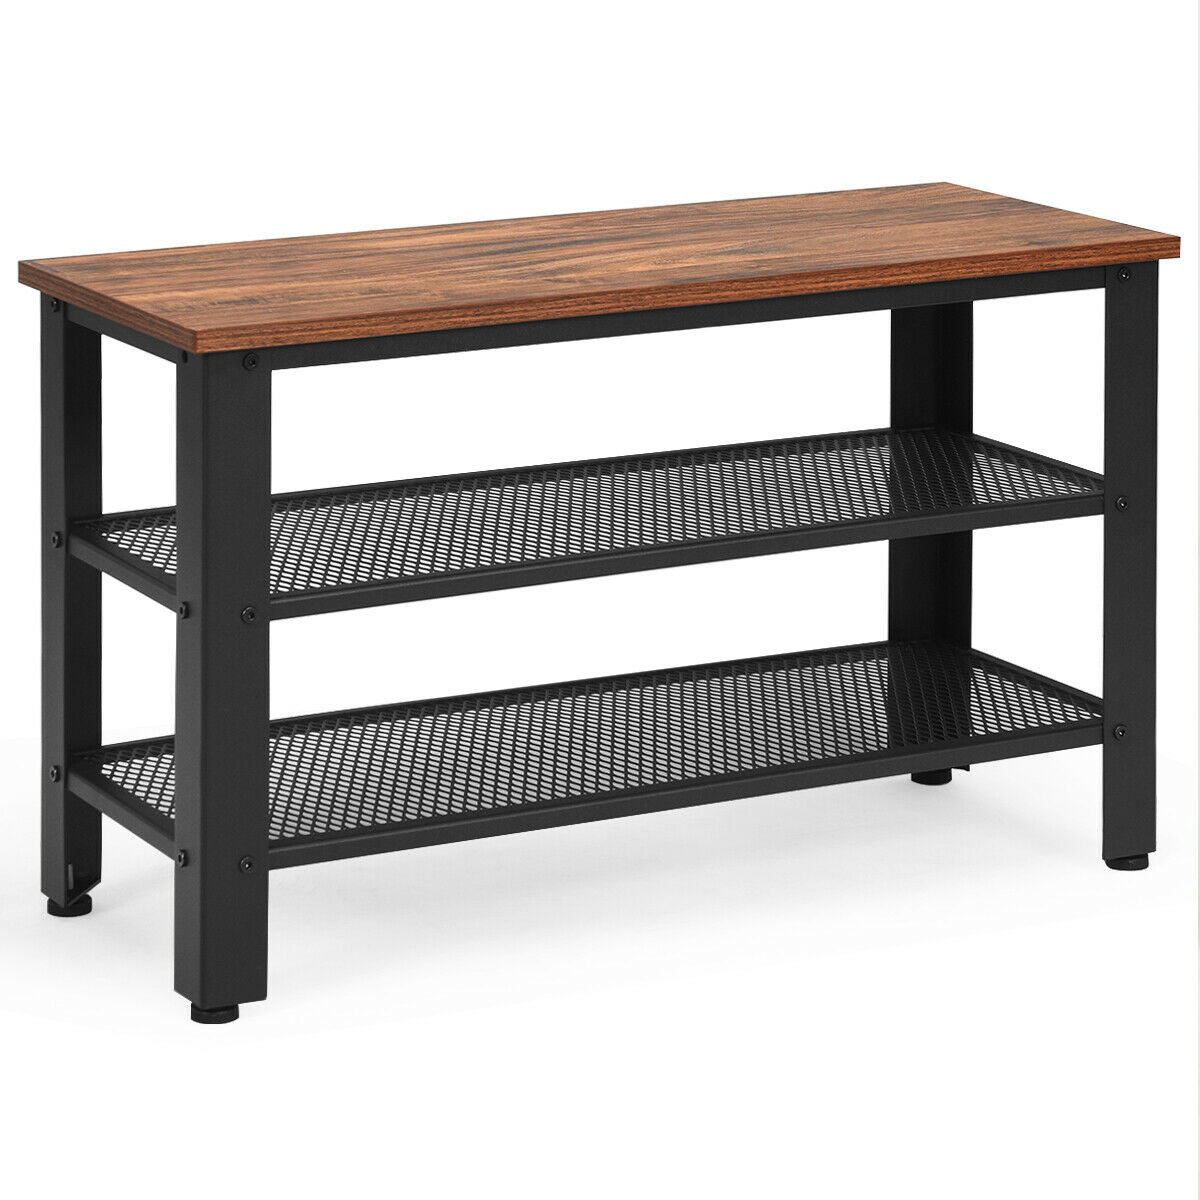 3-Tier Shoe Rack Industrial Shoe Bench With Storage Shelves For LivingRoom - Black And Brown